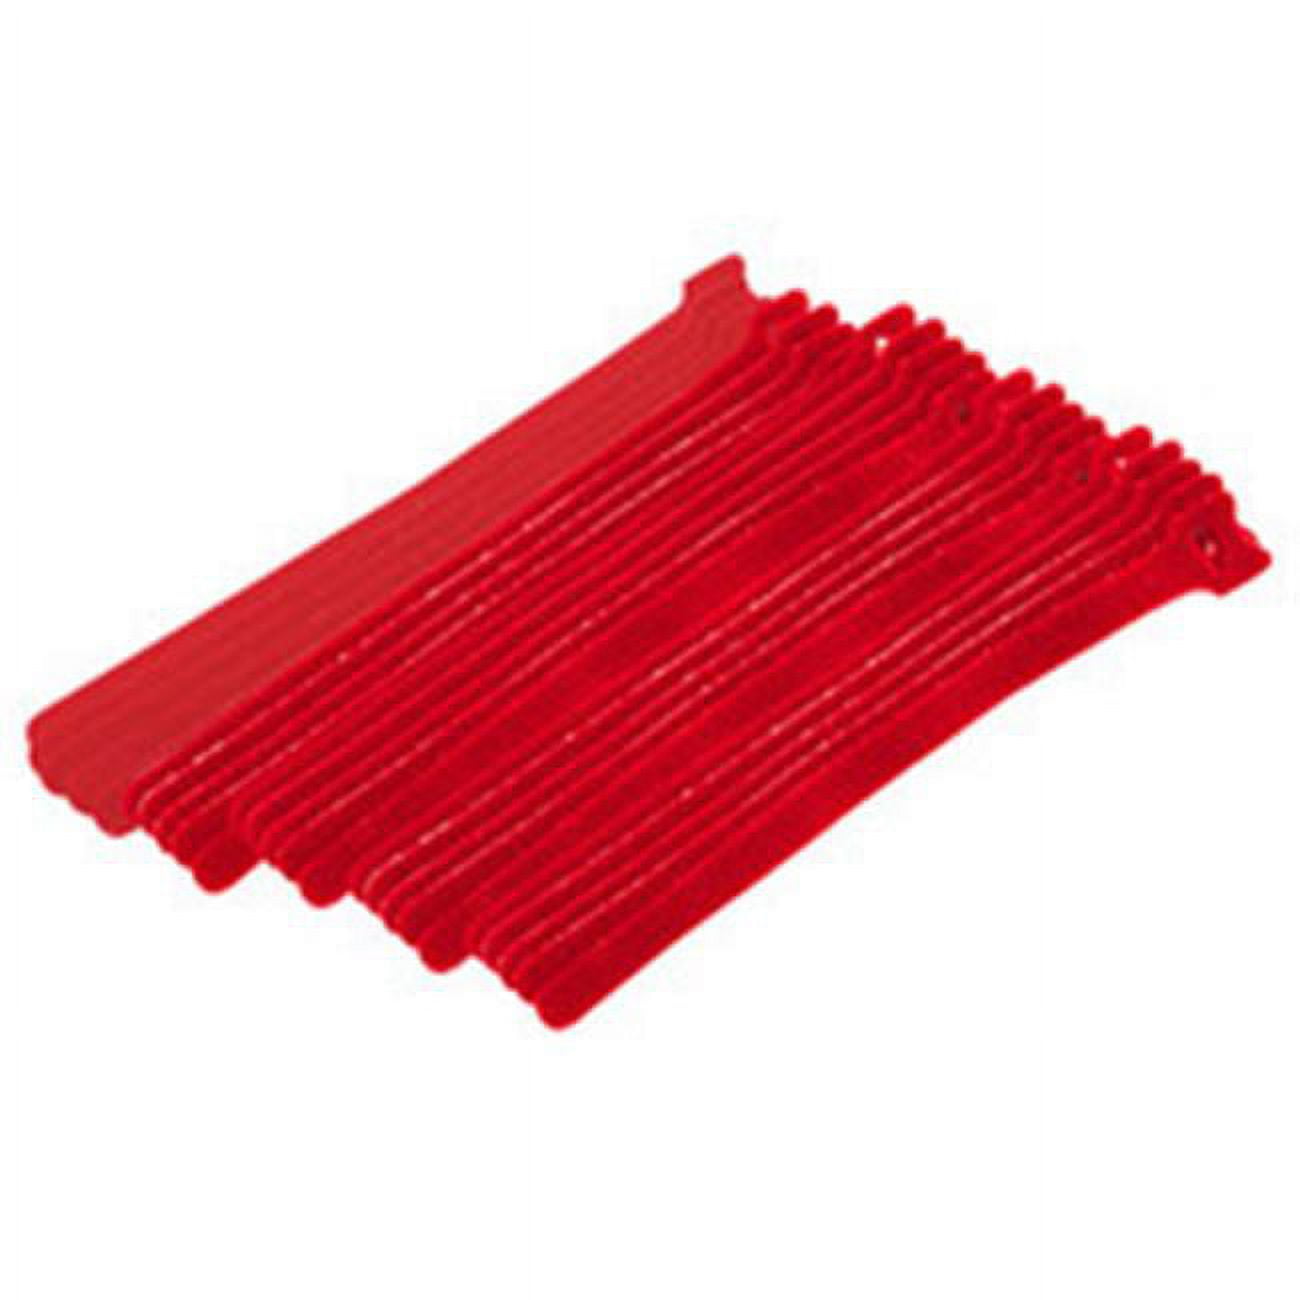 Picture of CableWholesale 30CT-07180 0.50 x 8 in. Red Hook & Loop Cable Strap with Eye - Pack of 25